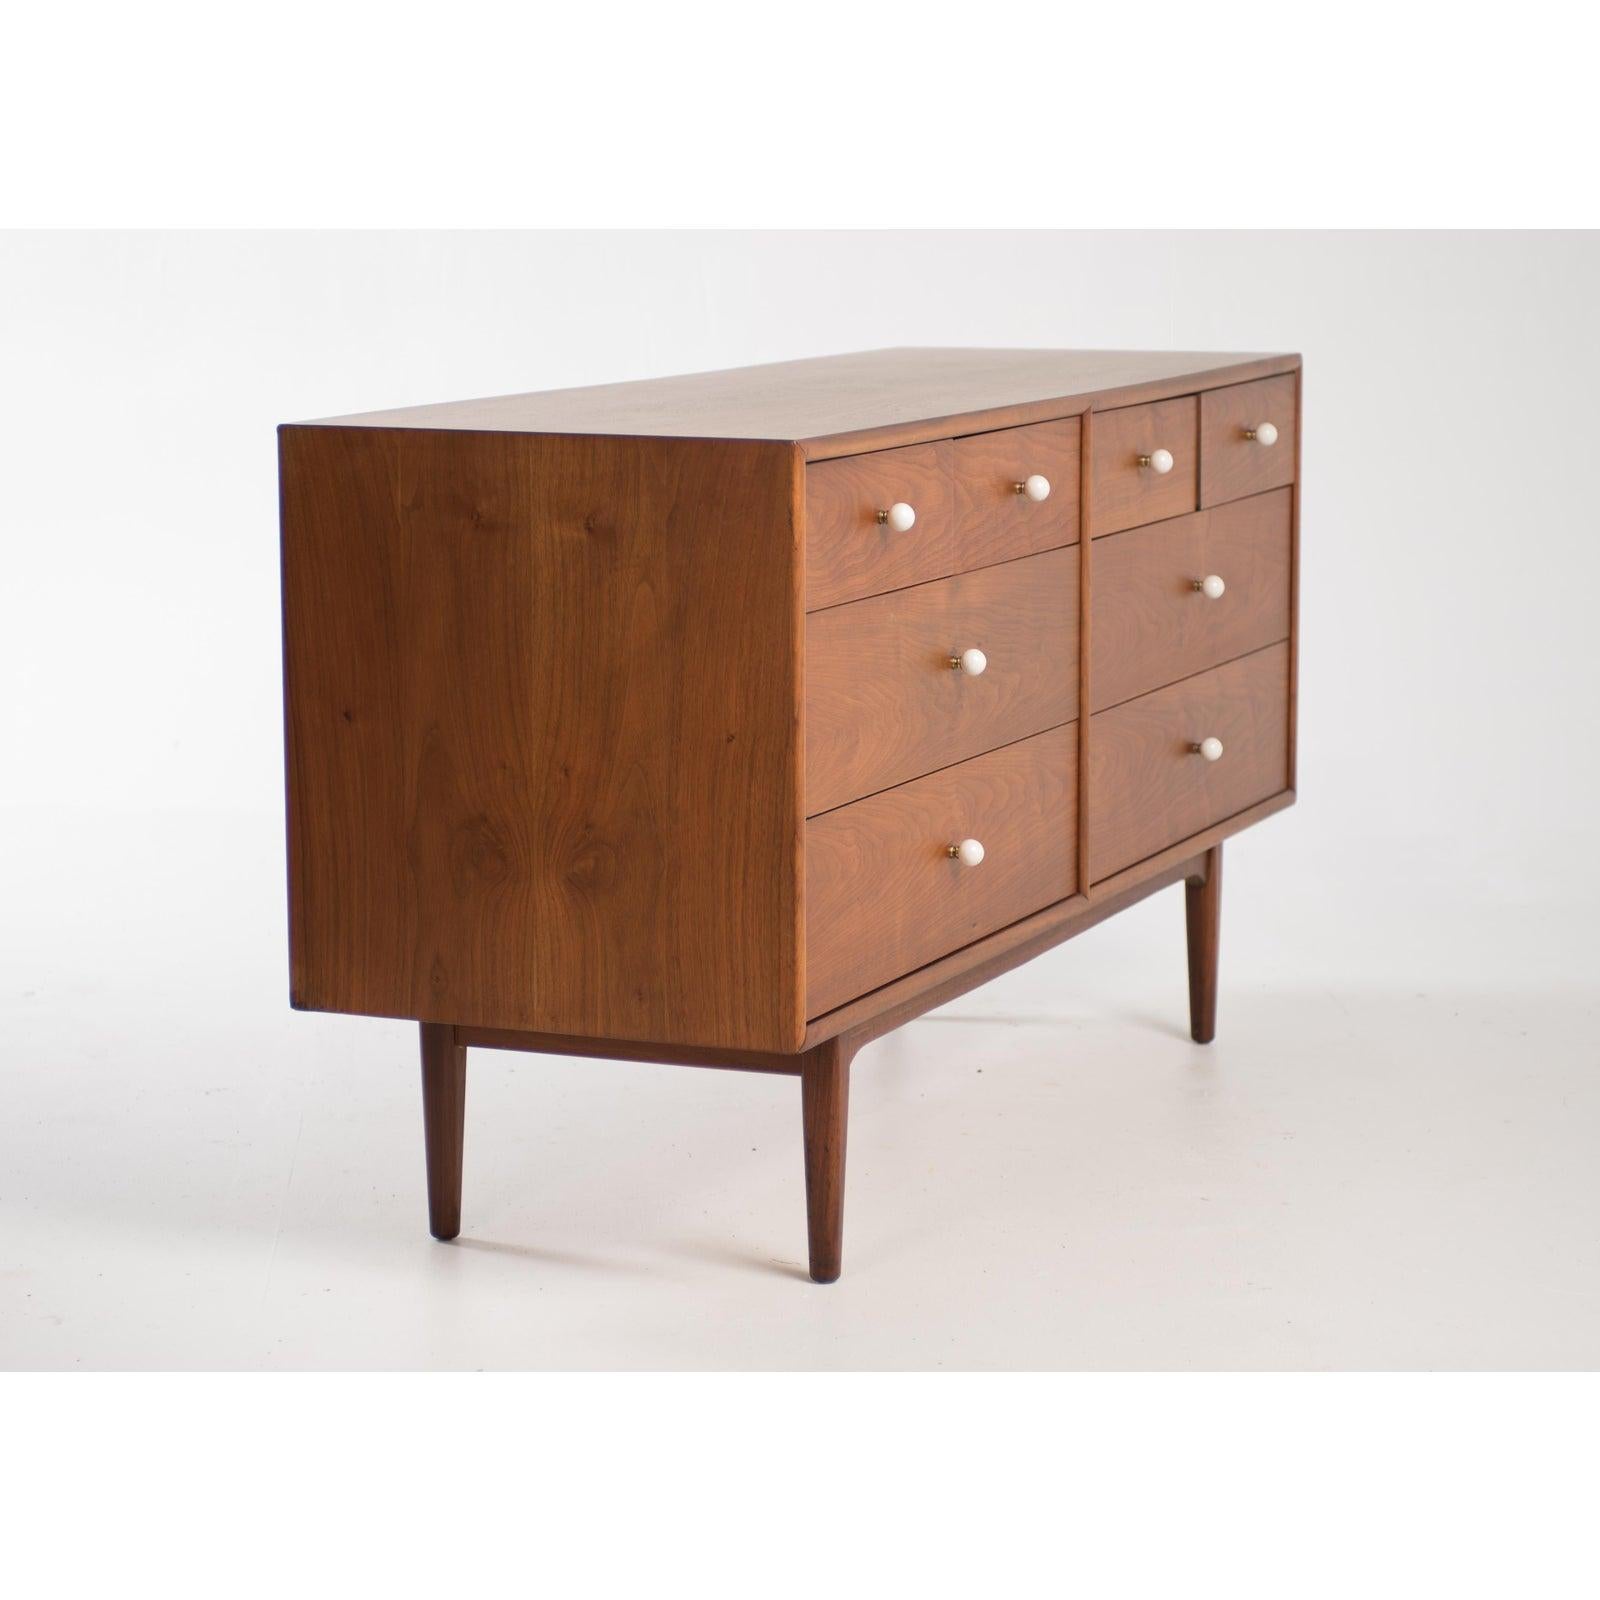 1960s Mid-Century Modern eight drawer dresser or credenza designed by Kipp Stewart and Stewart MacDougall for Drexel’s declaration collection. Walnut frame with white porcelain ball knobs on a brass fitting, clearly influenced by George Nelson's